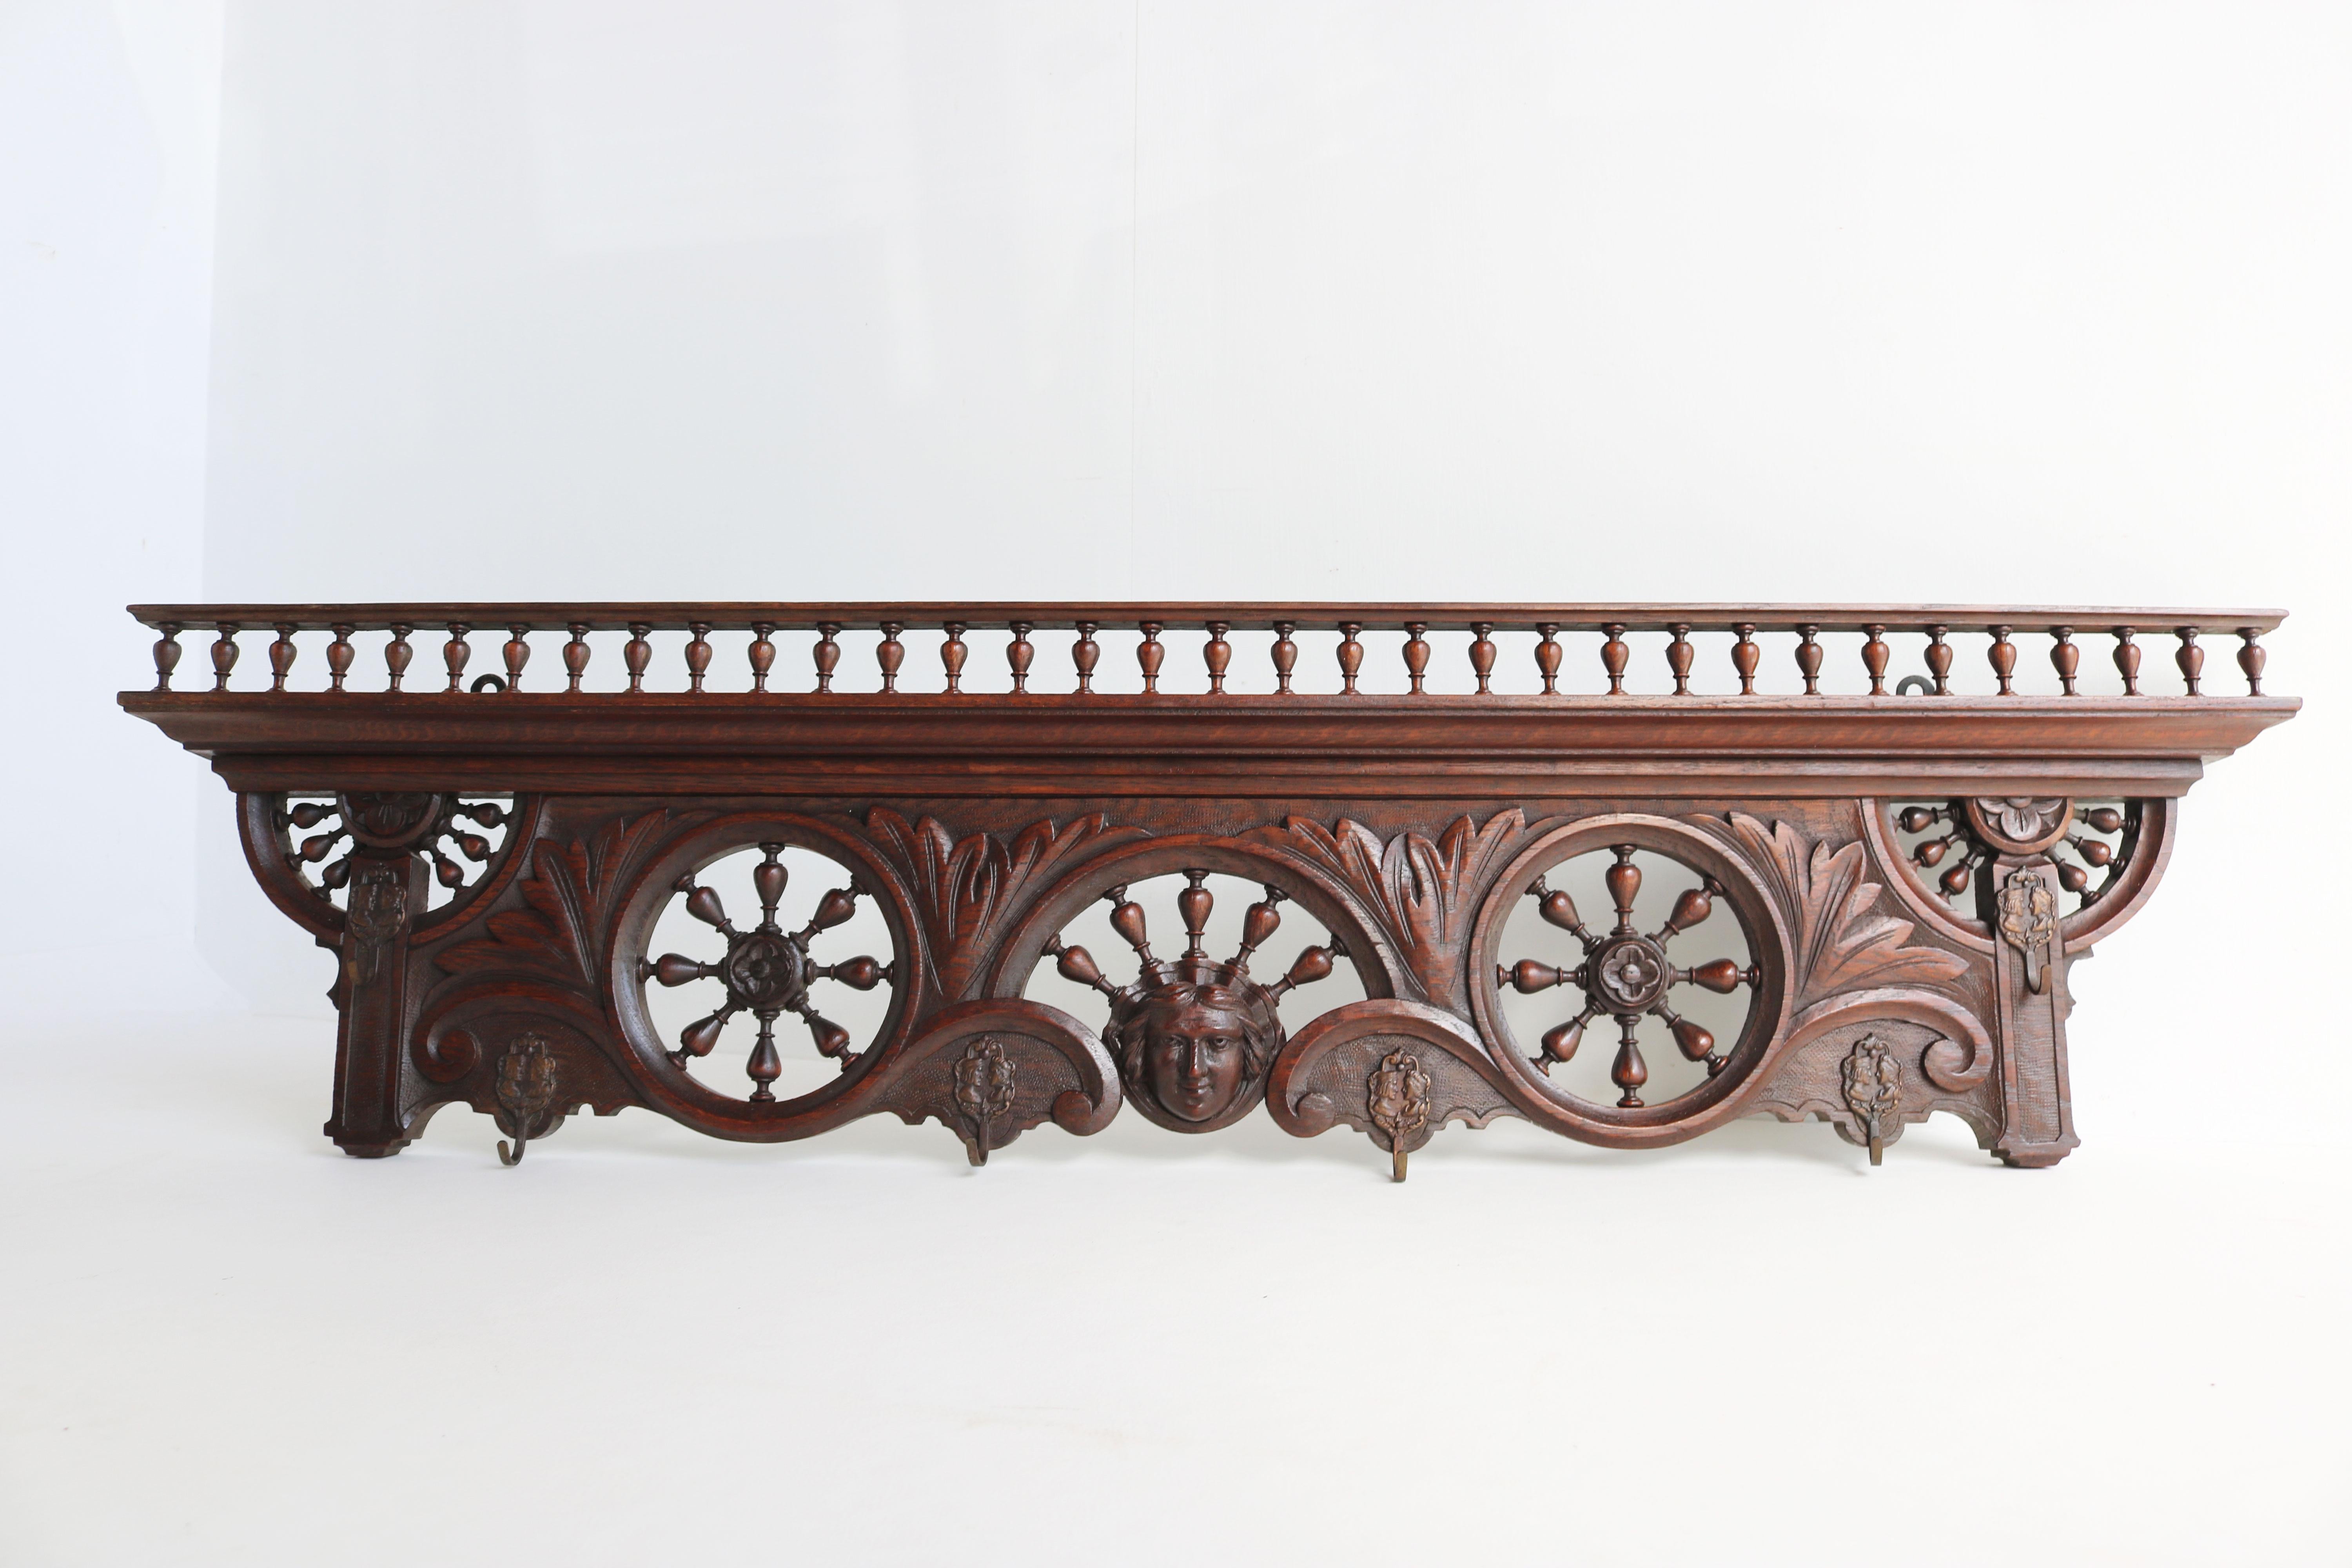 Gorgeous antique French Breton Brittany coat rack from the 19th century France. 
Fully made from hand carved European oak, with marvellous details.
Very rare model with 5 open ship wheel spindles! 
Highly detailed carved face in the centre of the